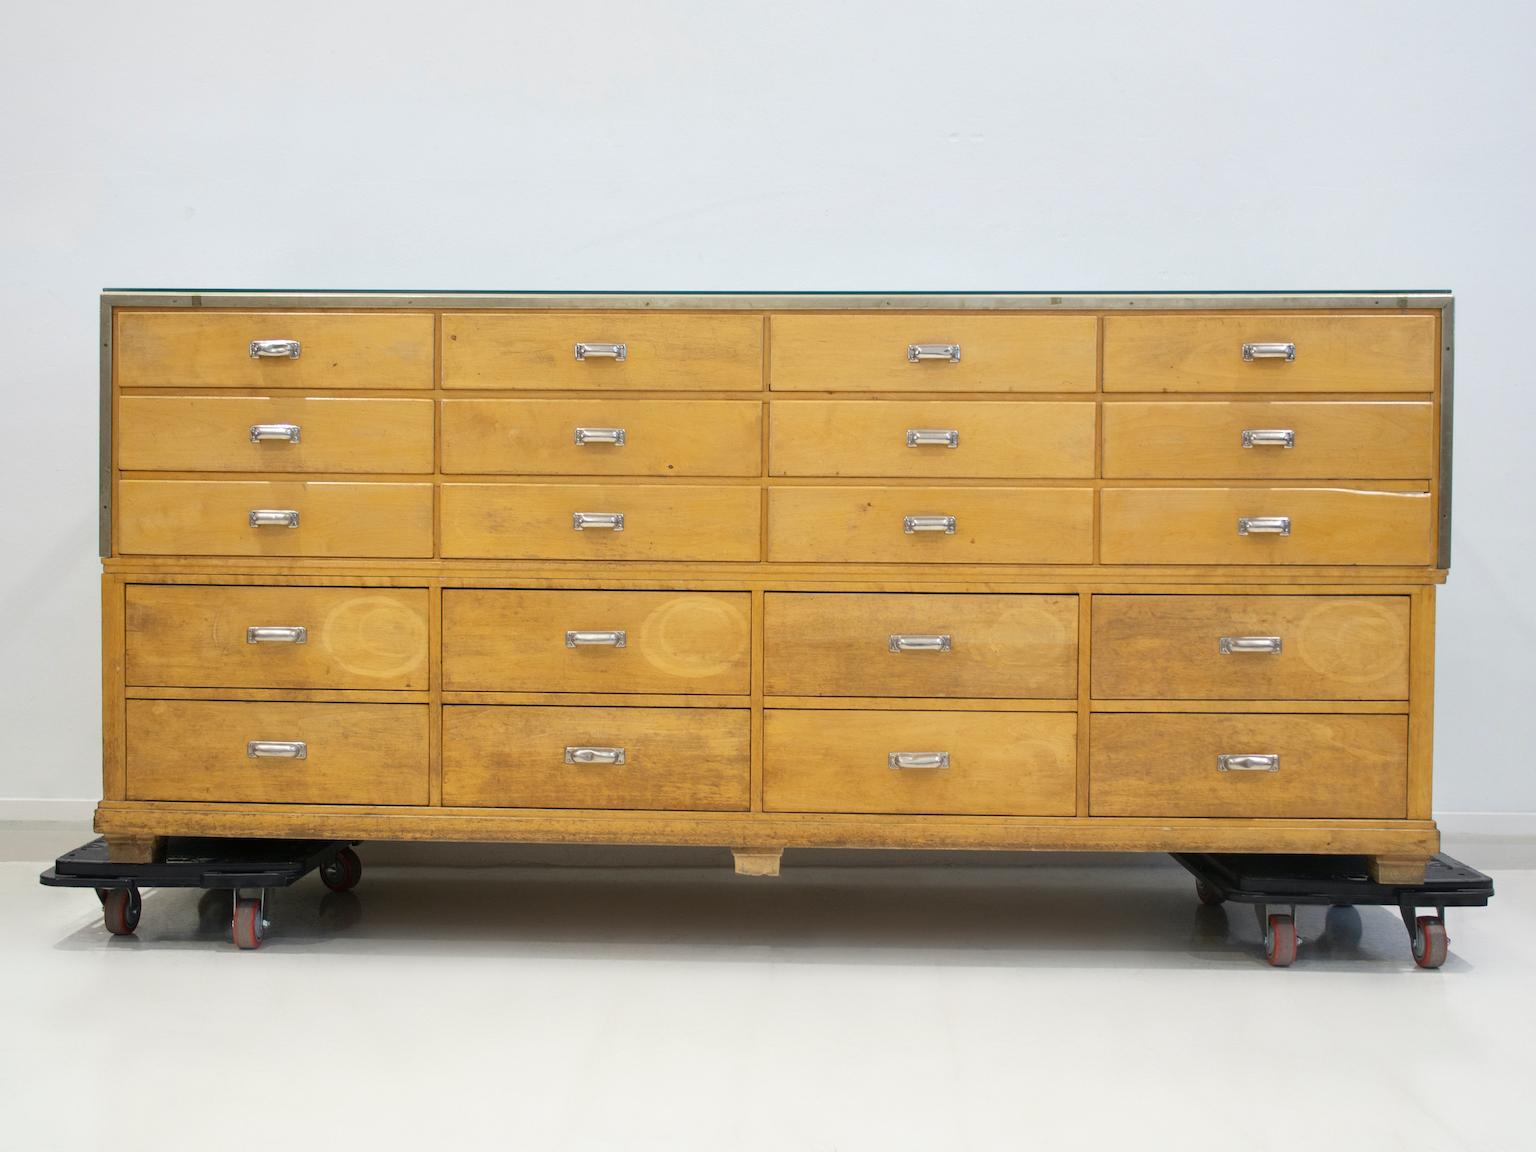 Shop Counter of Birch and Oak Wood with Twenty Drawers, 1940's For Sale 9